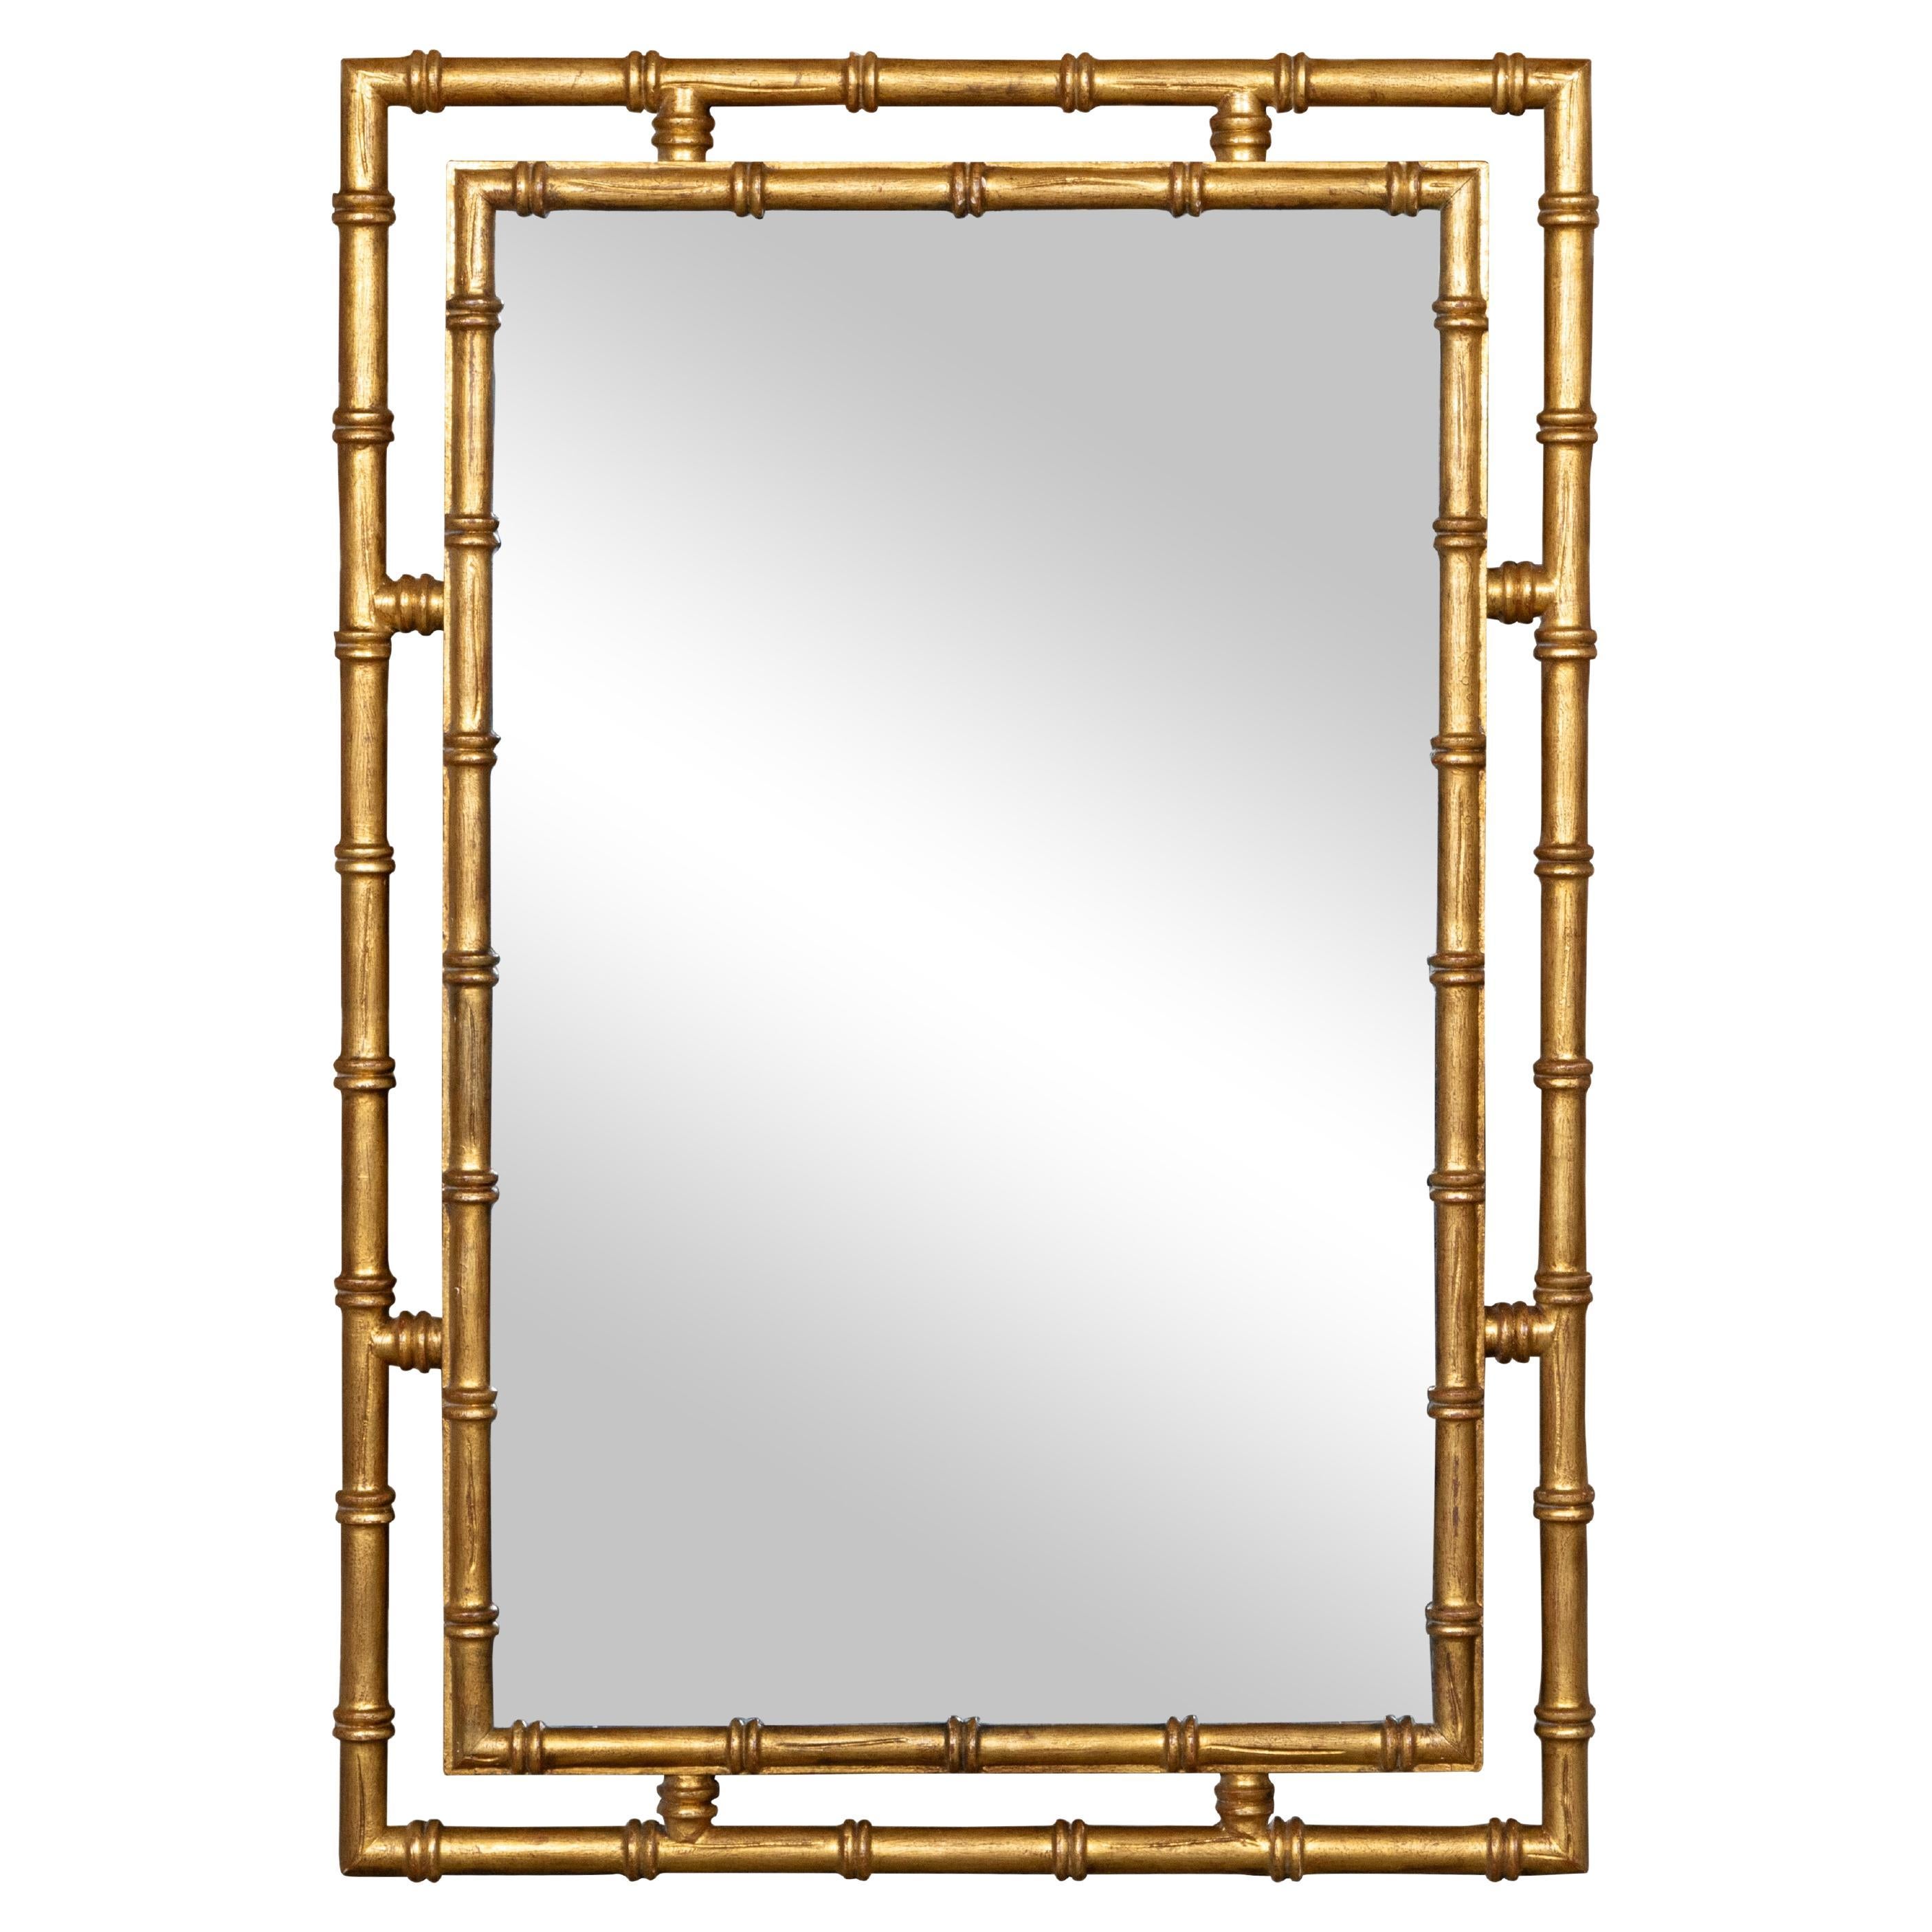 Midcentury Italian Gilt Faux Bamboo Mirror with Beveled Glass